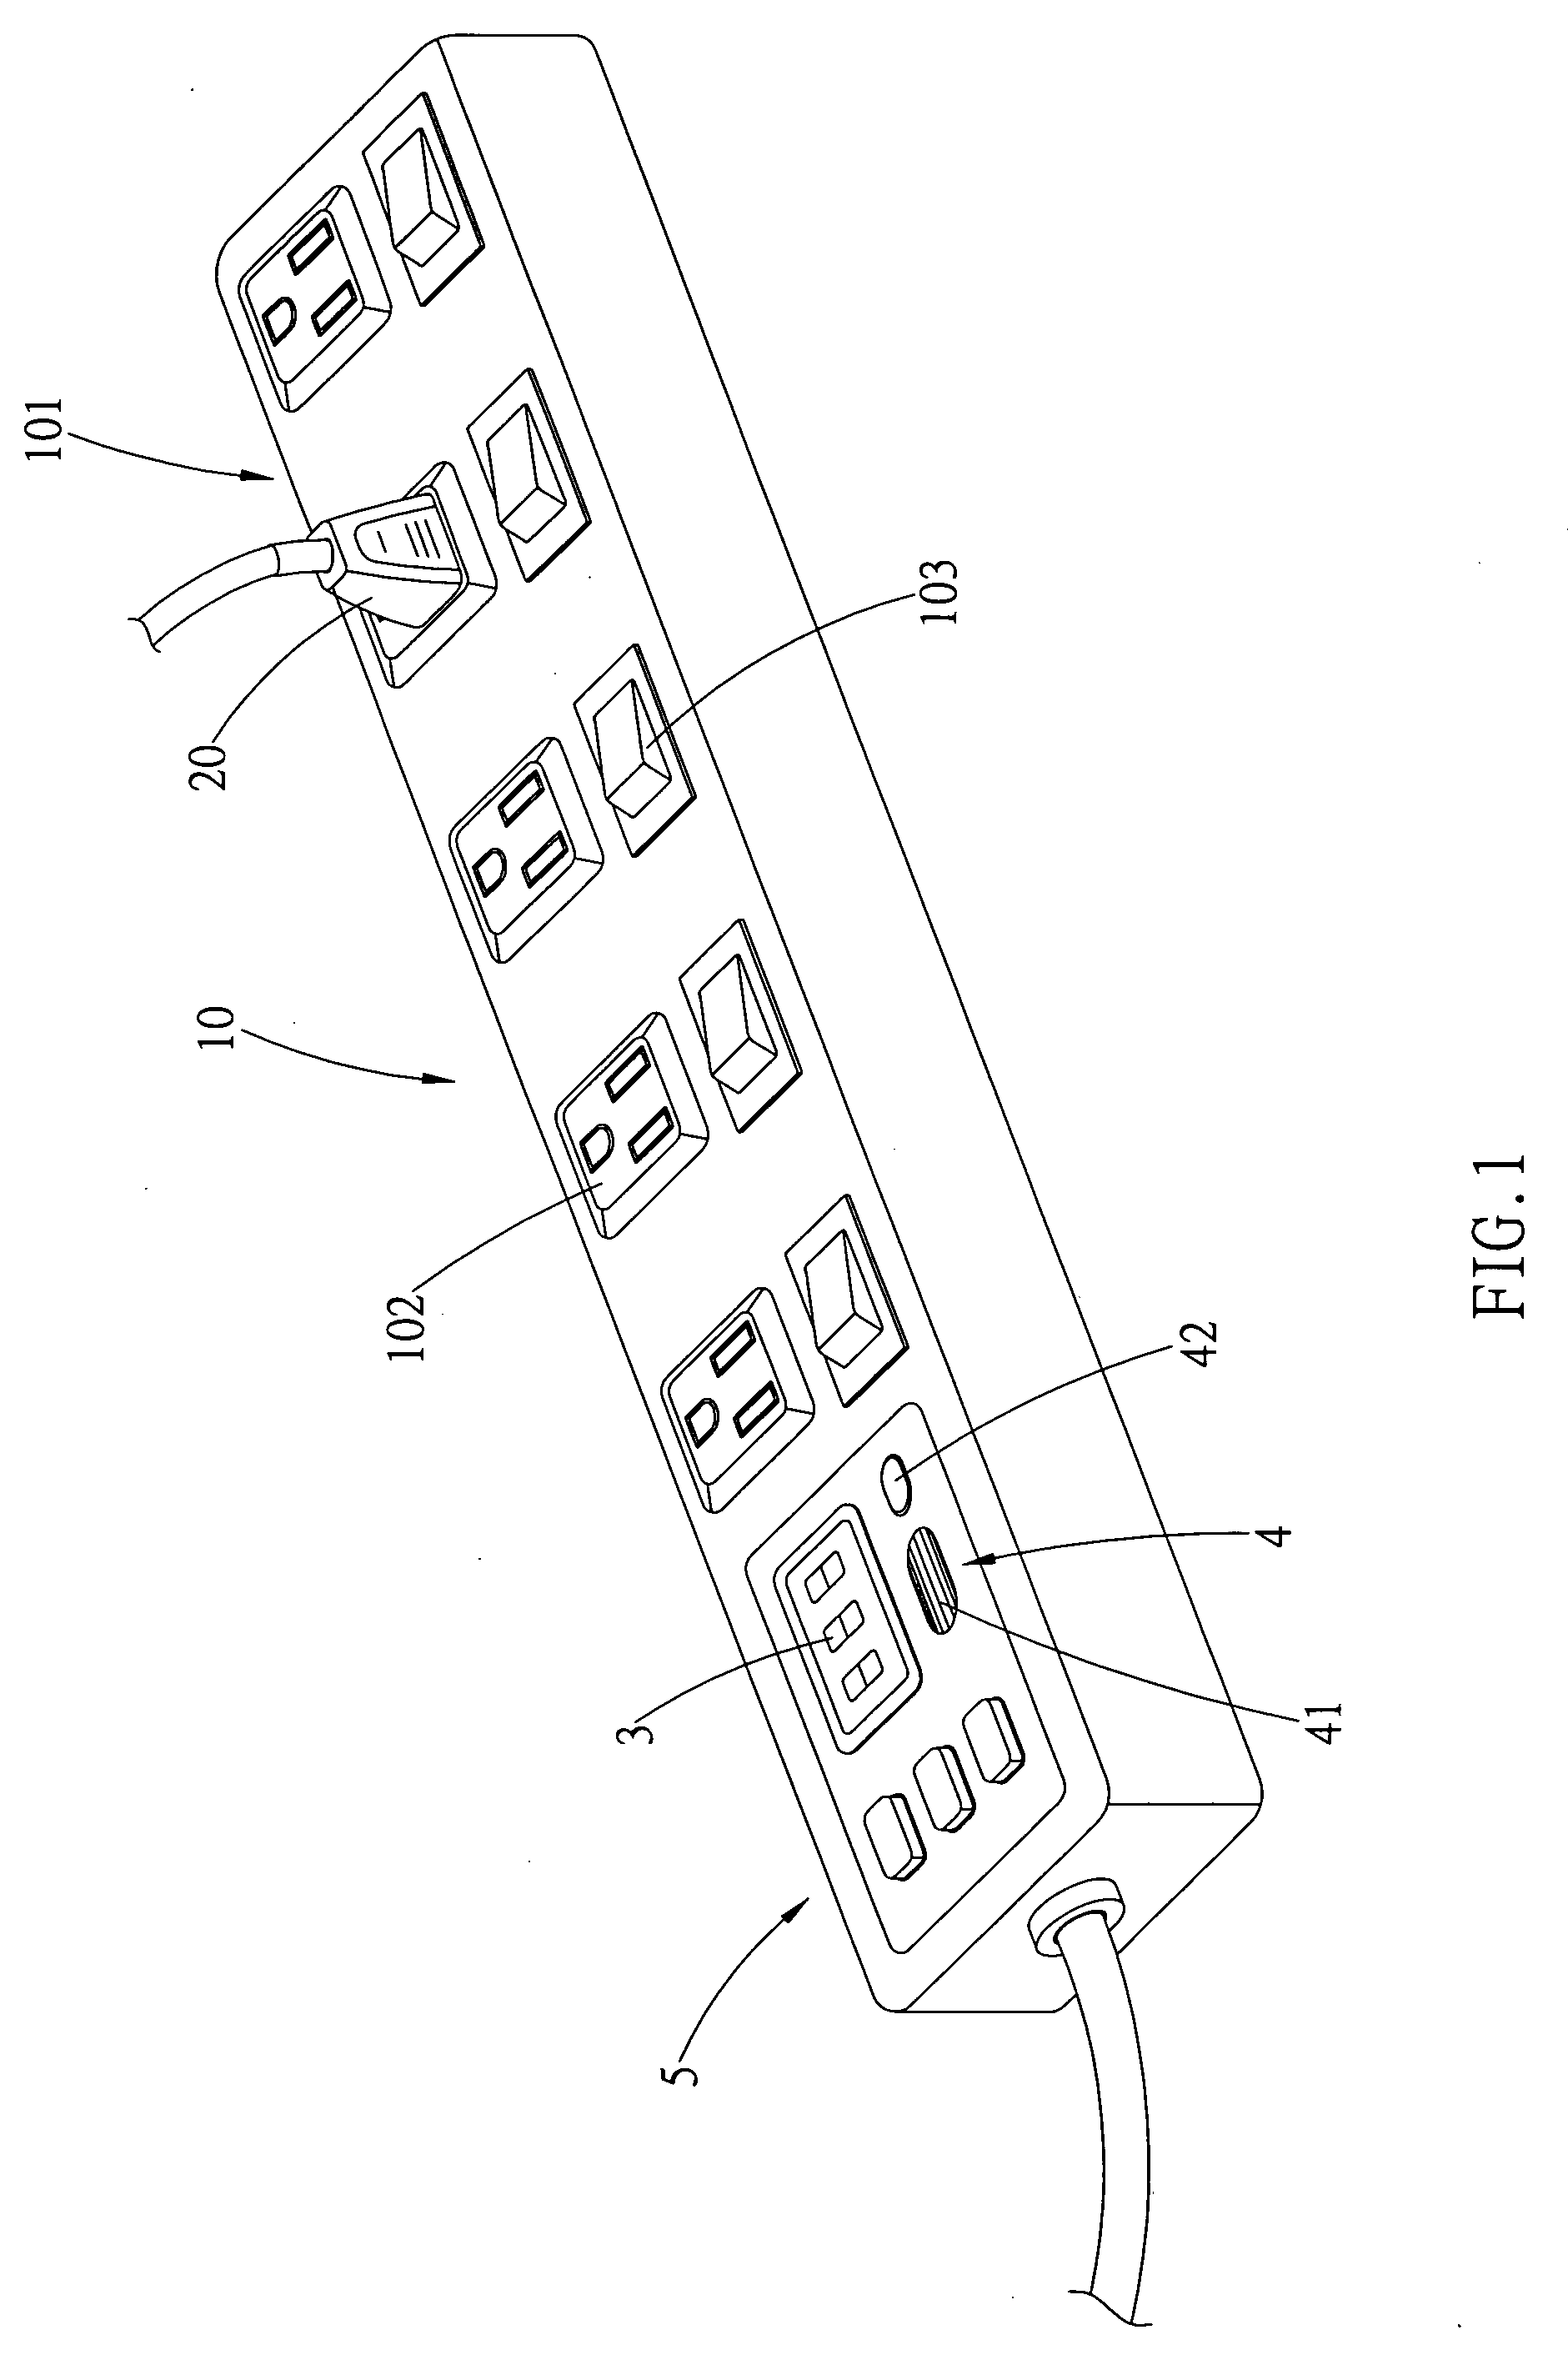 Protection device and a method that detect electricity